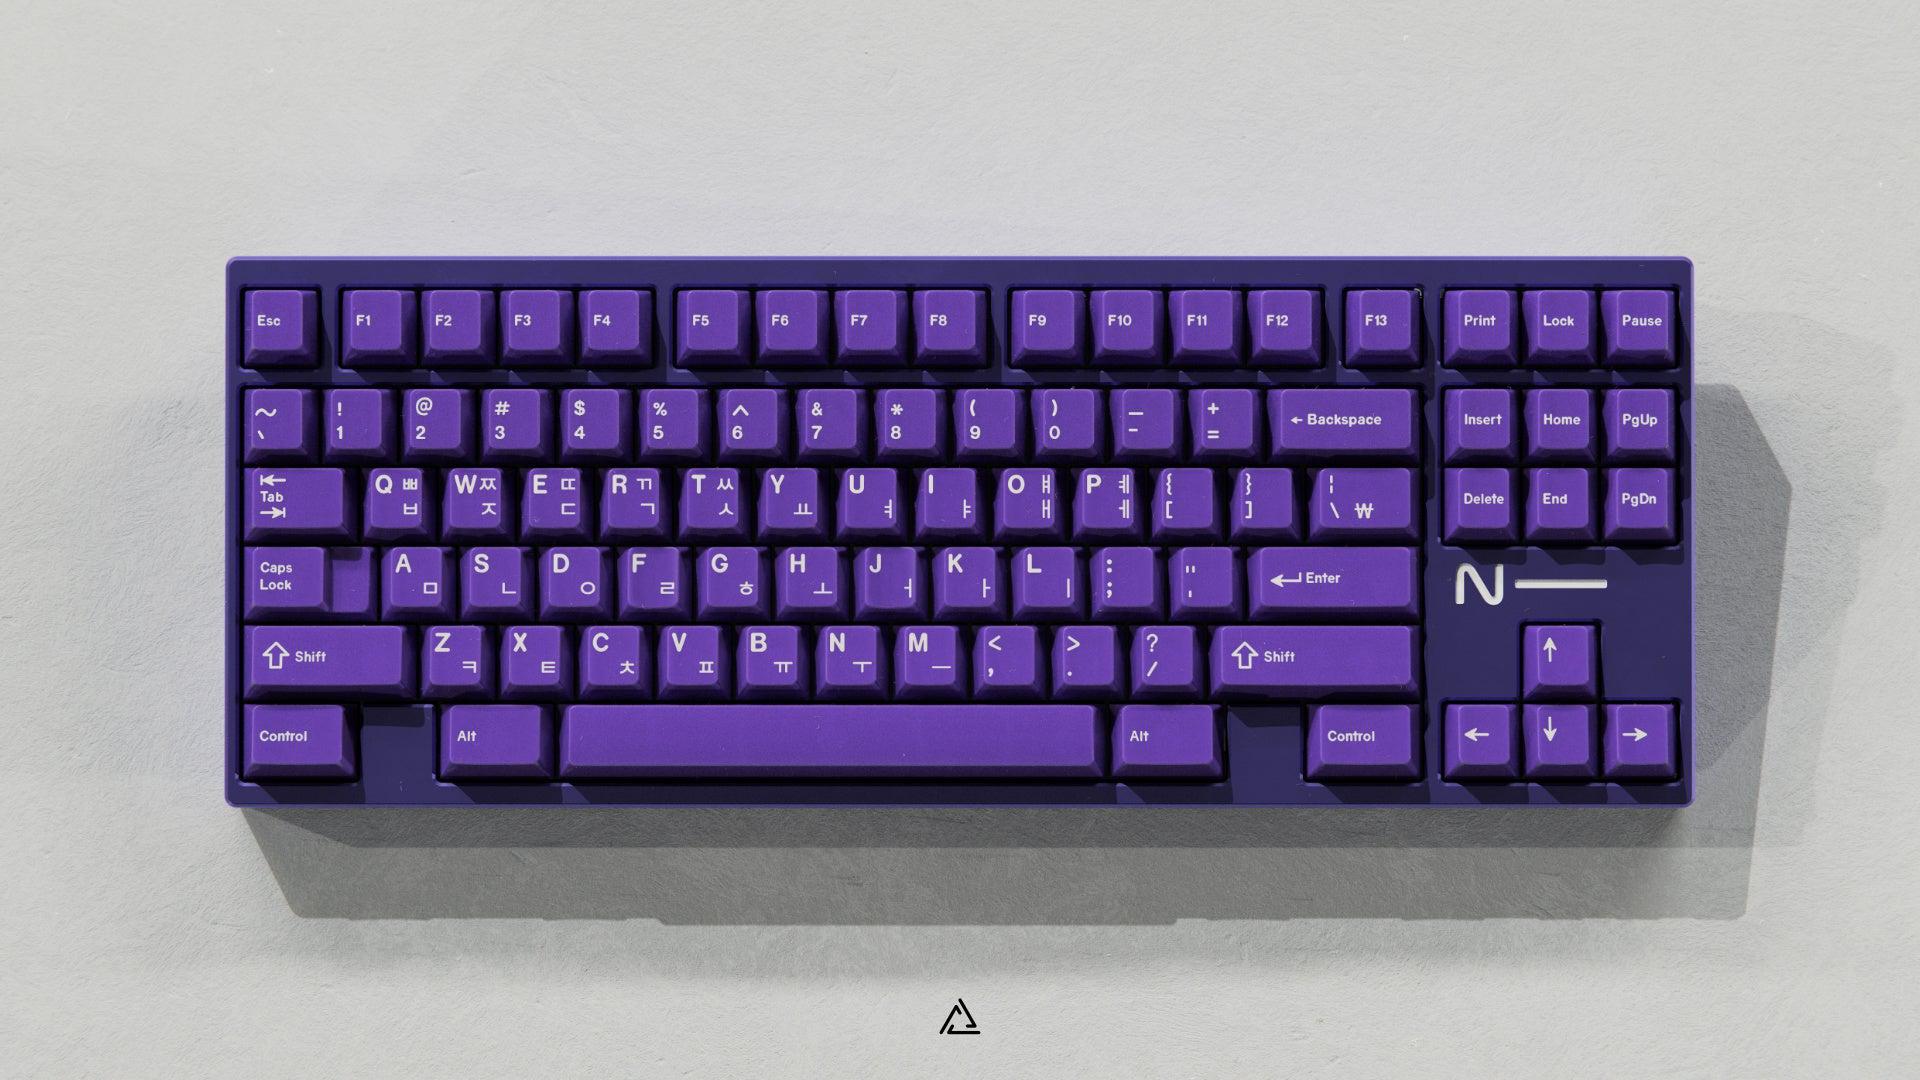 GMK CYL Purple Night Keycaps-Space Cables-gmk keycaps-gmk keyboard-custom keycaps-keycaps-keyboard keycaps